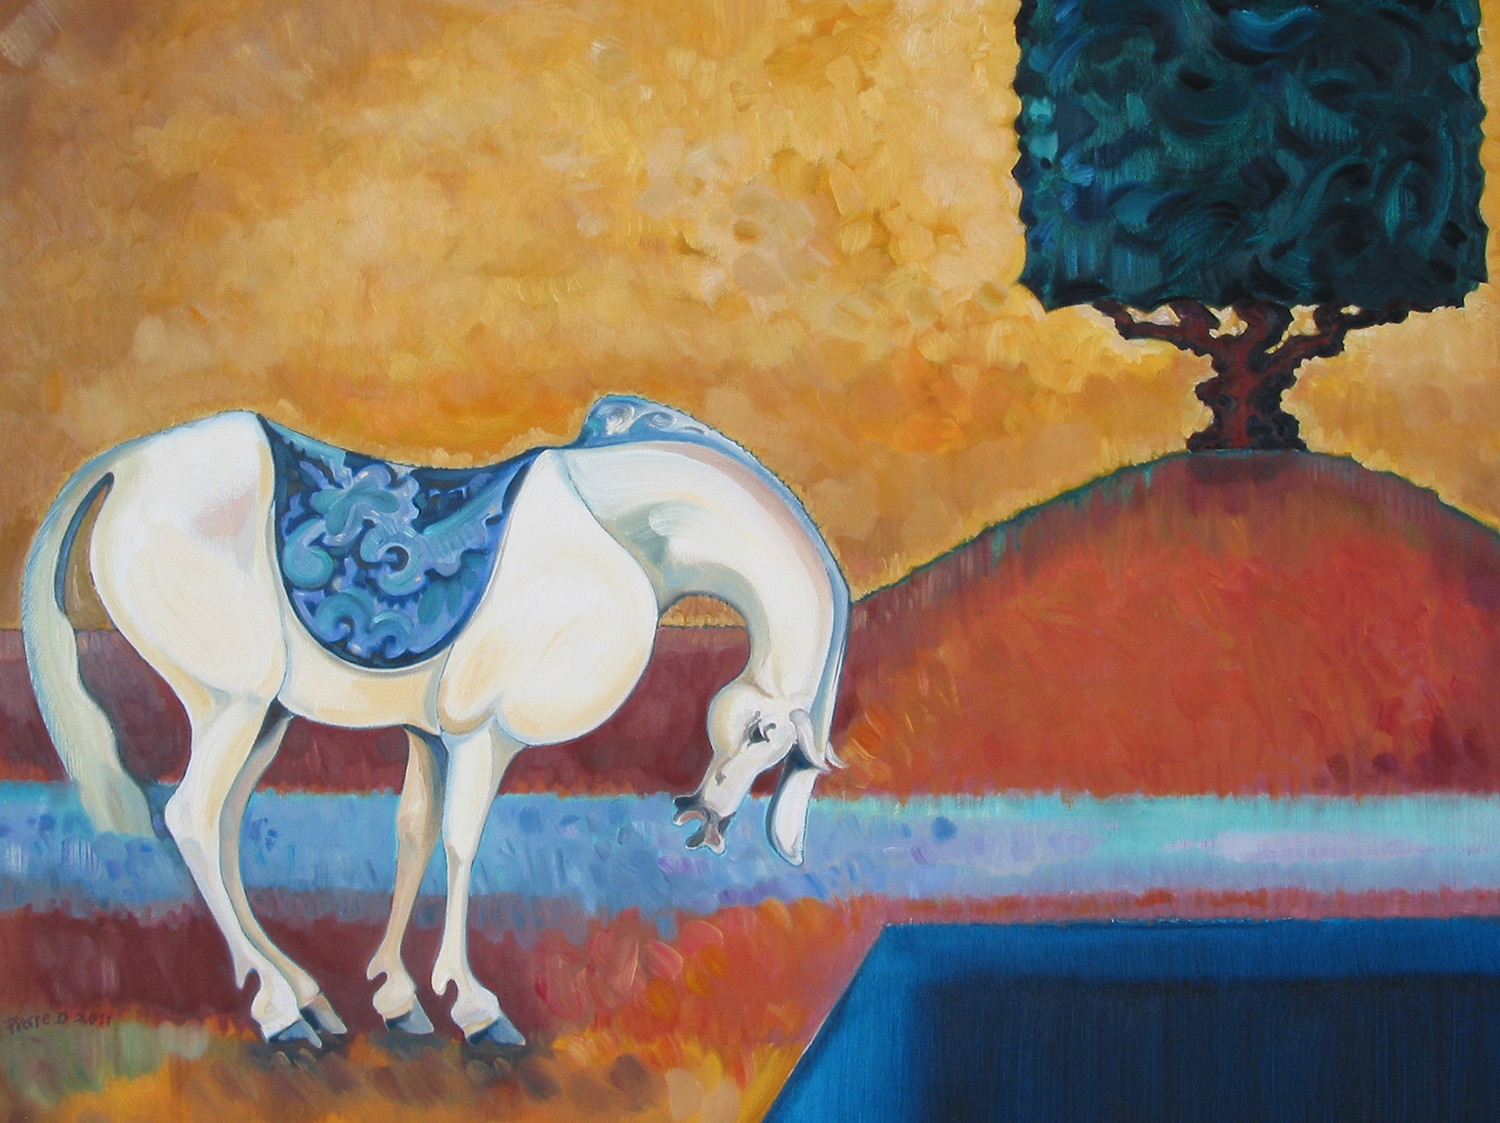  Persian lll The Yew Tree &nbsp; ©  Oil on canvas  80 cm high x 100 cm wide  "I wanted to see if I could find the silence in the earlier "Walnut Tree" painting and place it in this painting, together with the fragile, ceramic roundness of the horse".